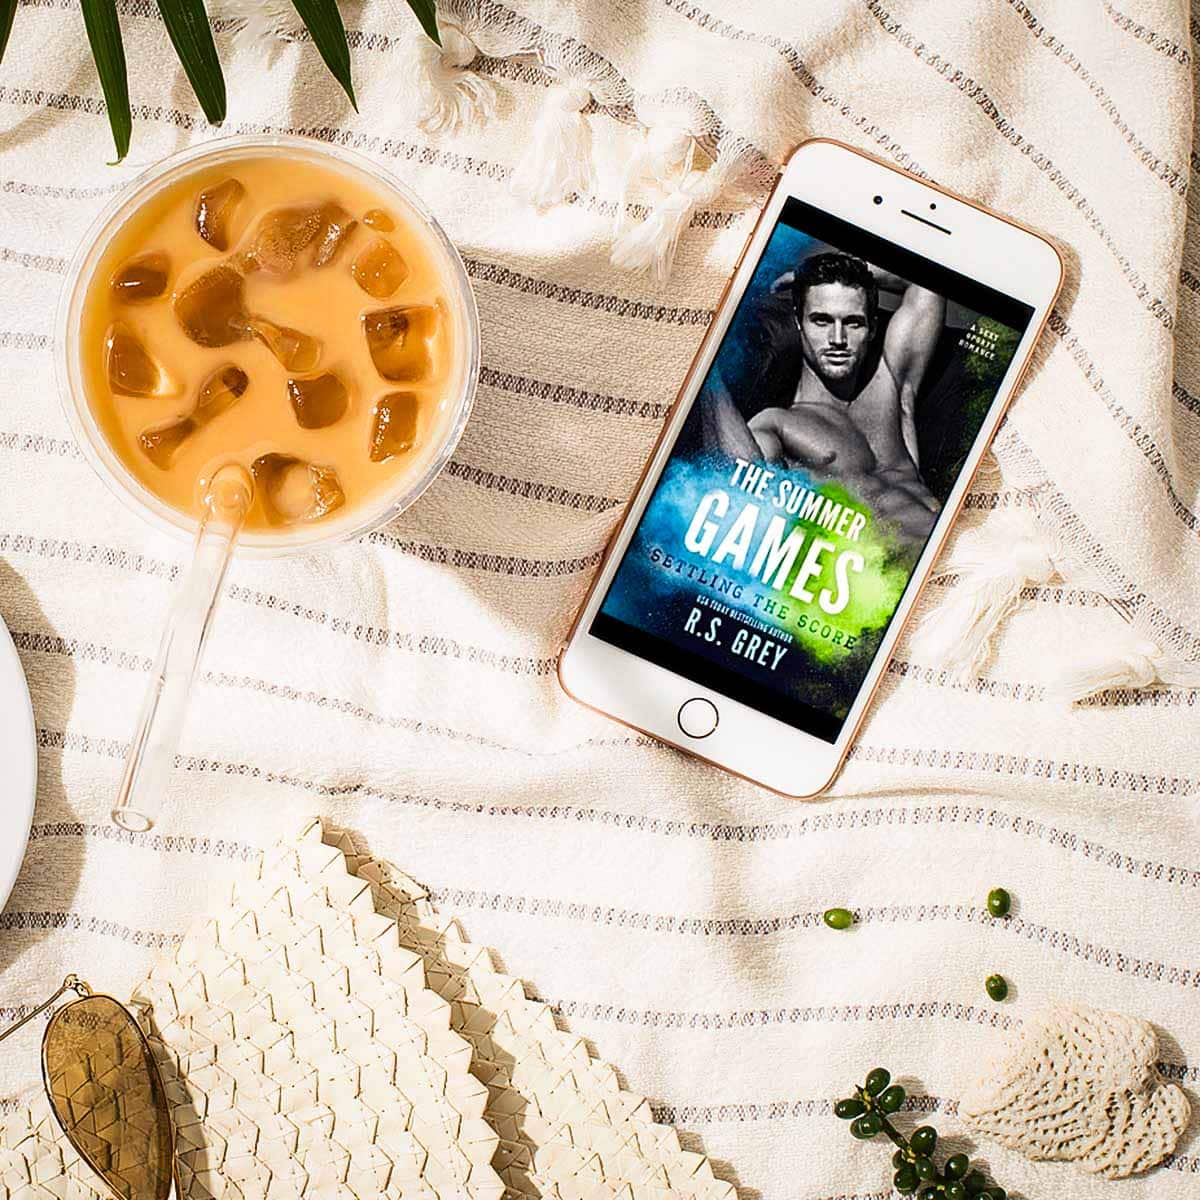 If you’re looking for a fun, sweet, and sexy read with a touch of drama and angst, Settling the Score: The Summer Games by RS Grey should be a perfect fit!